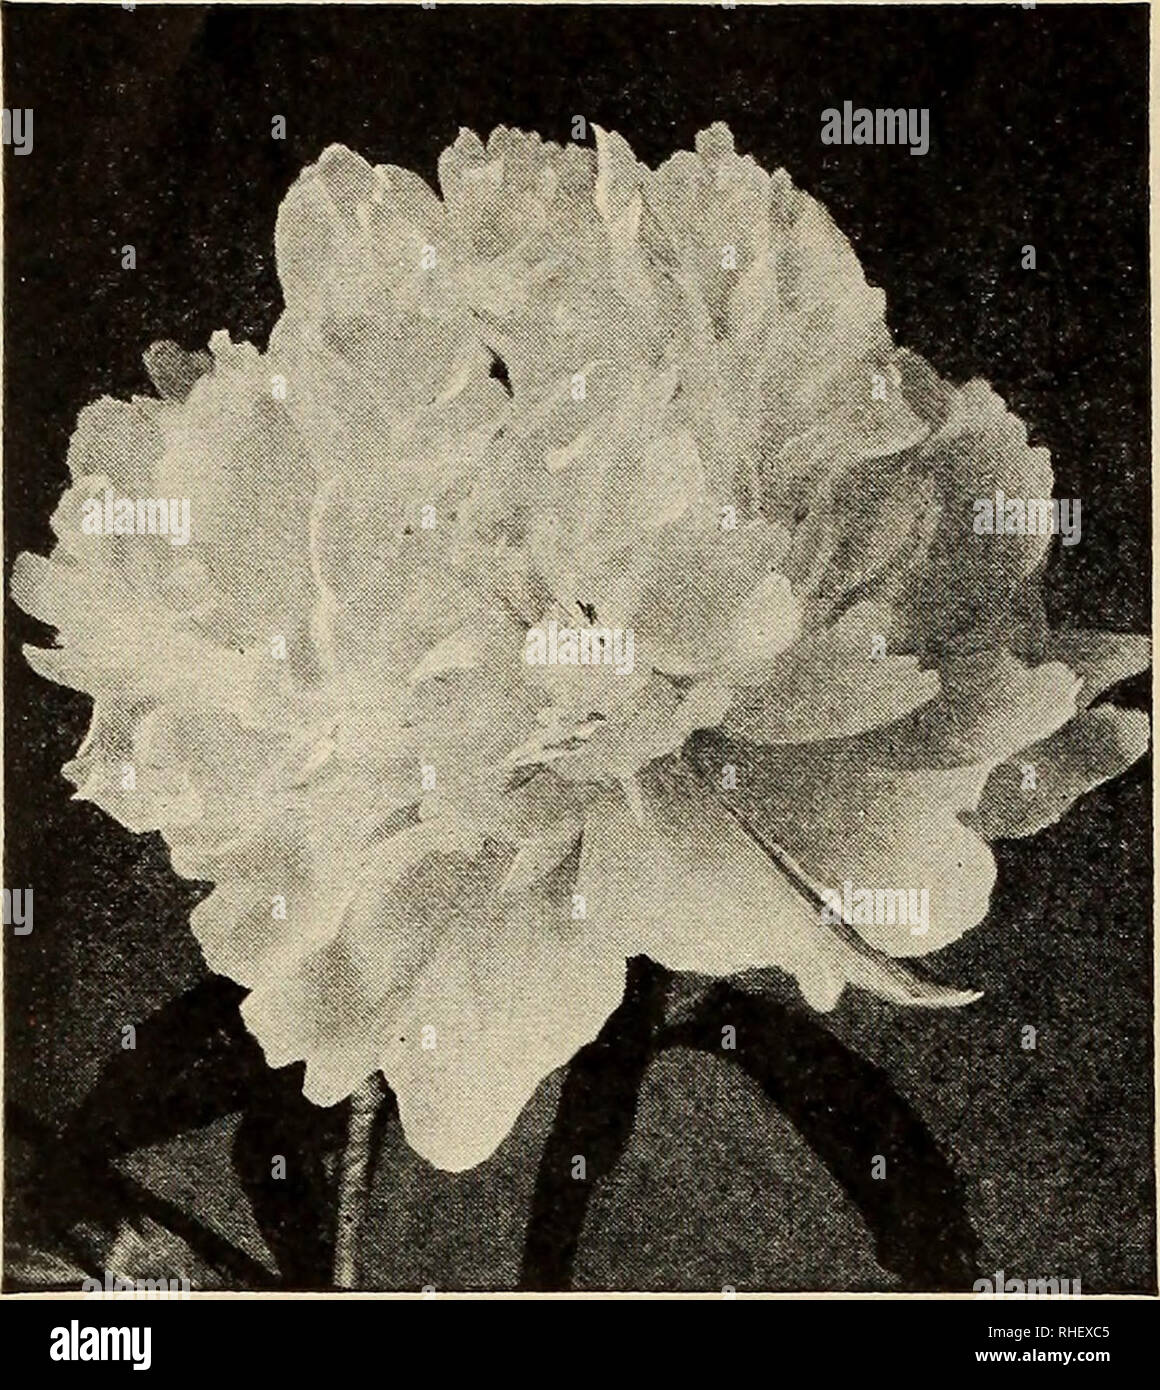 . Bolgianos fall catalogue : capitol city bulbs &amp; seeds. Bulbs (Plants) Catalogs. F. W. BOLGIANO &amp; CO. WASHINGTON, D. C. PEONY ROOTS Peonies are un- doubtedly one of the most satisfac- tory species among the herba- eous perennials. Once established they require little care and reward the gardener with an abundance of fragrant and beautiful colored blooms of great size each spring.. Peony lav- White, edged Alexander Dumas. Rich red. Edulis Superba. Deep pink. General Bertrard. Beautiful Felix Crousse. Rich ruby-red. light pink. Rubra Superba. Deep crimson- Avalanche. Pure white. pink. P Stock Photo